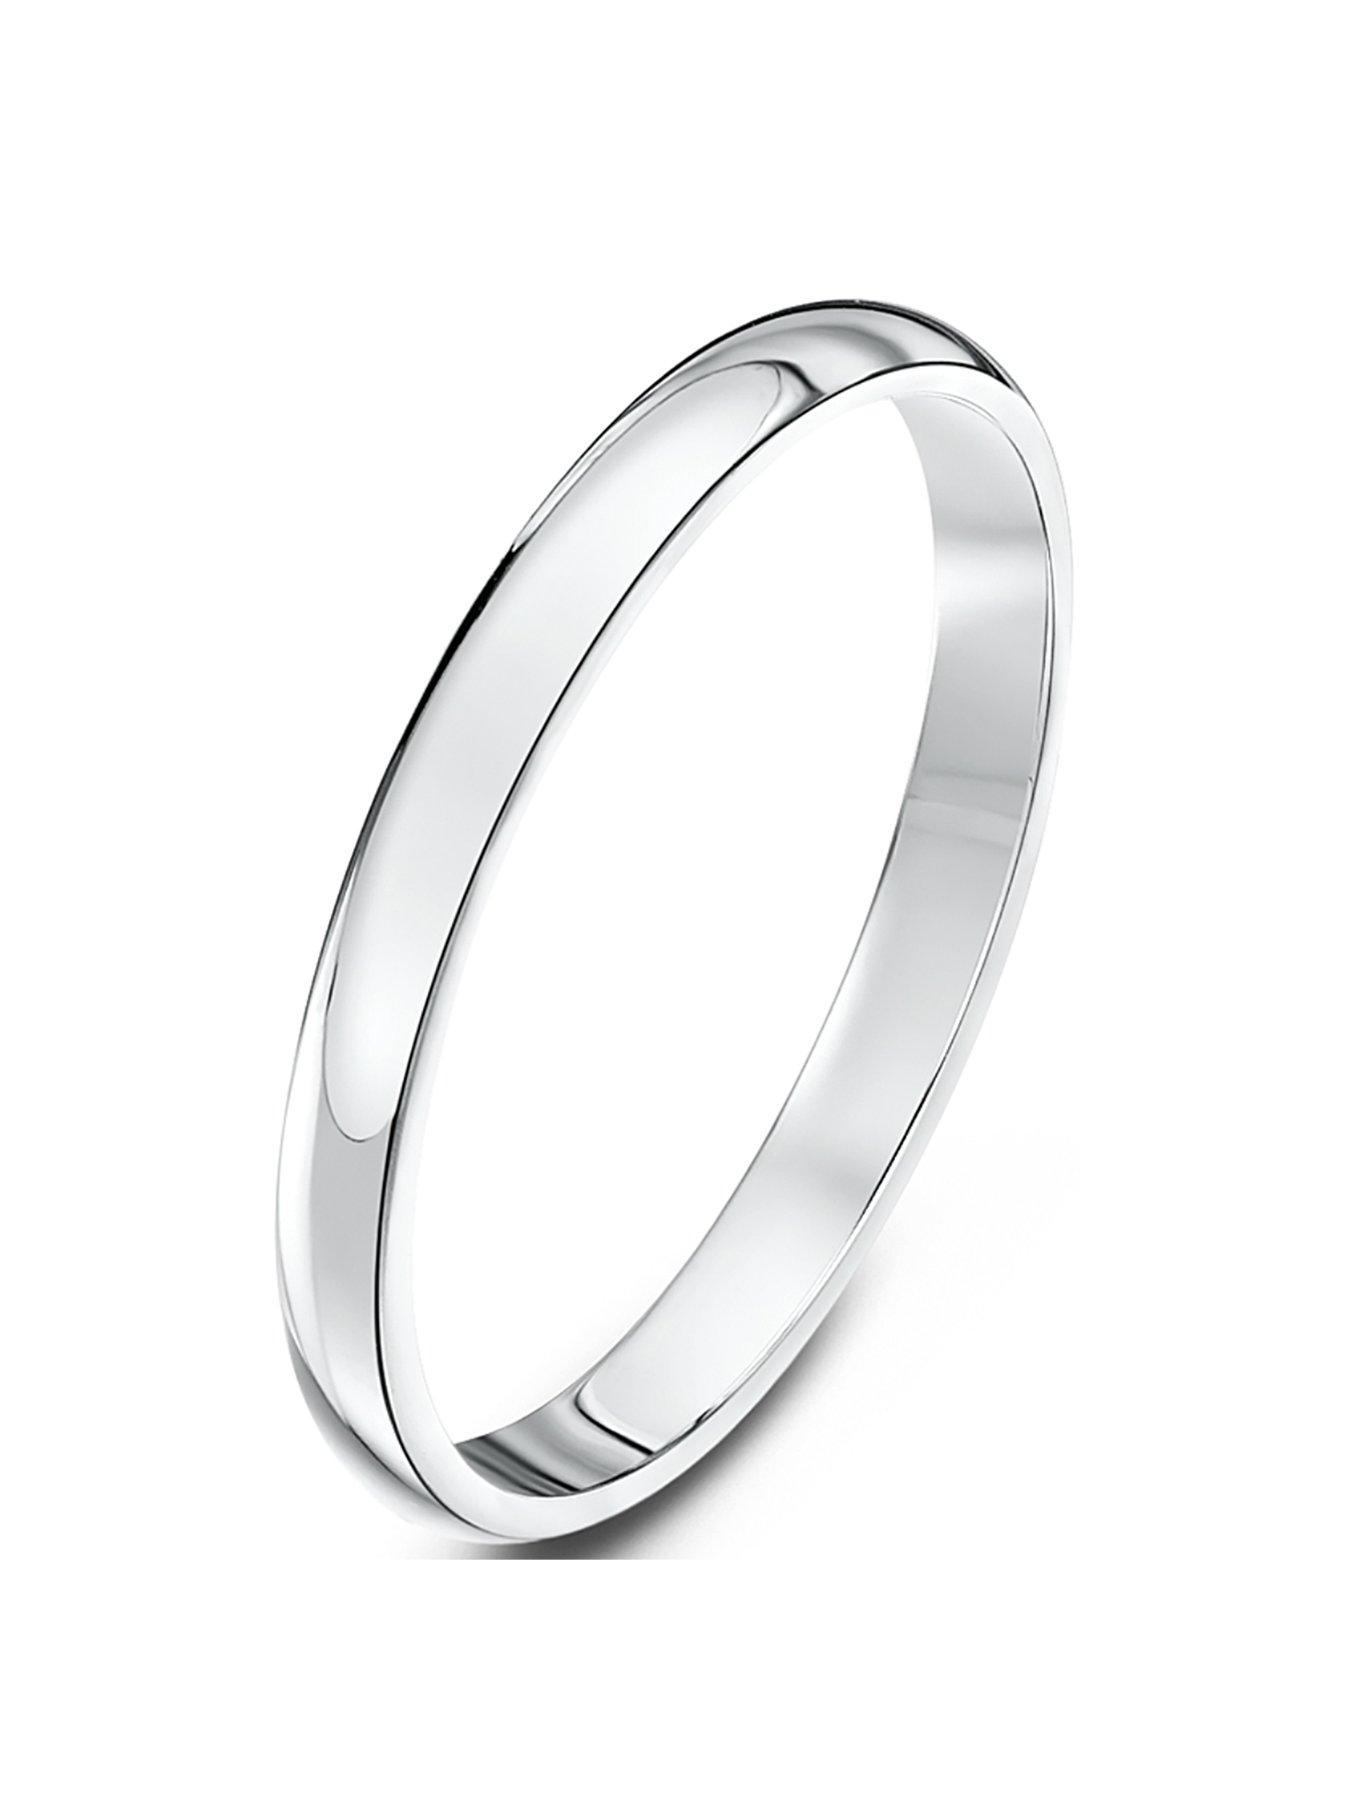 Compound Interest: What are wedding rings made of, and how do their  properties vary?